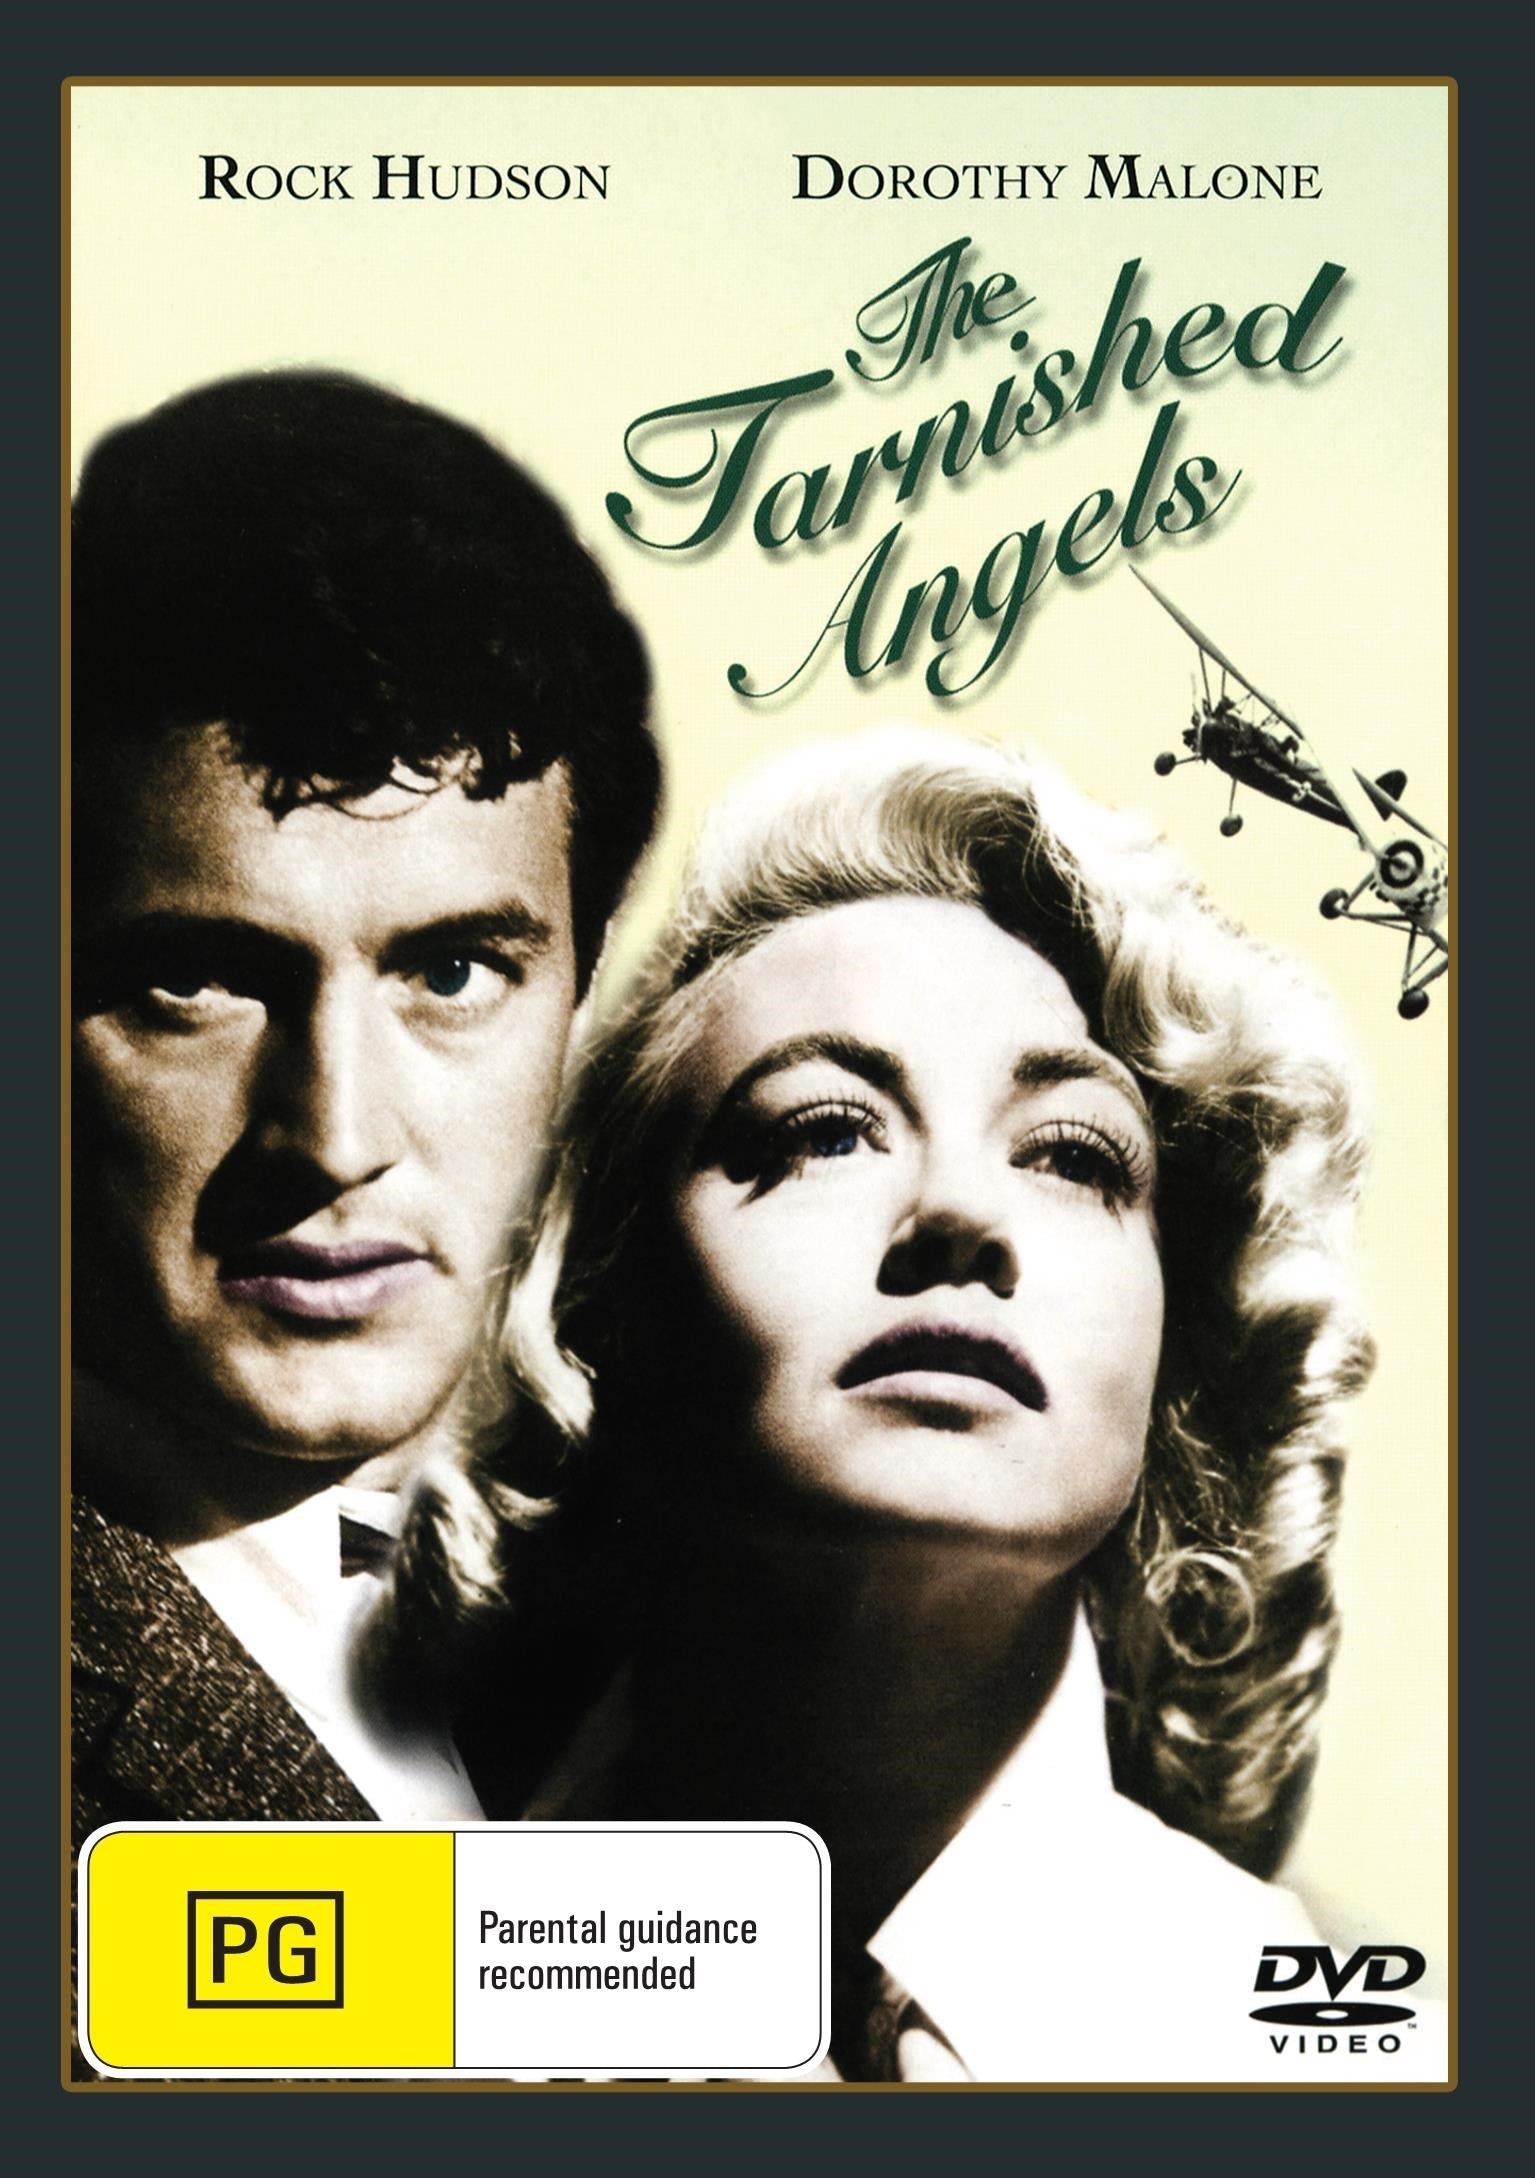 The Tarnished Angels rareandcollectibledvds